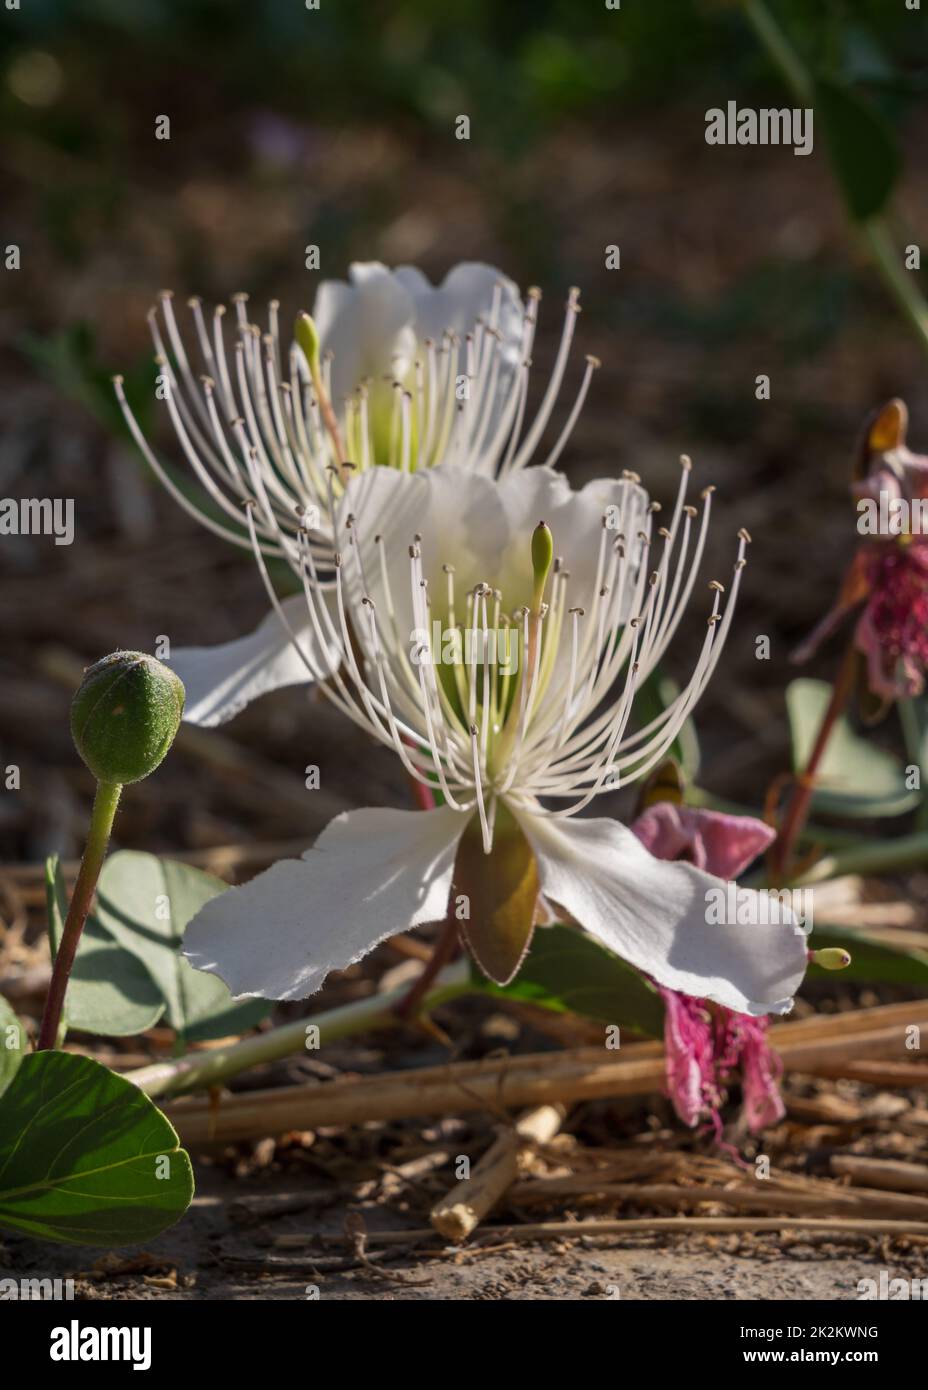 Close up view of fresh white flowers of capparis spinosa or caper bush outdoors in bright sunlight Stock Photo